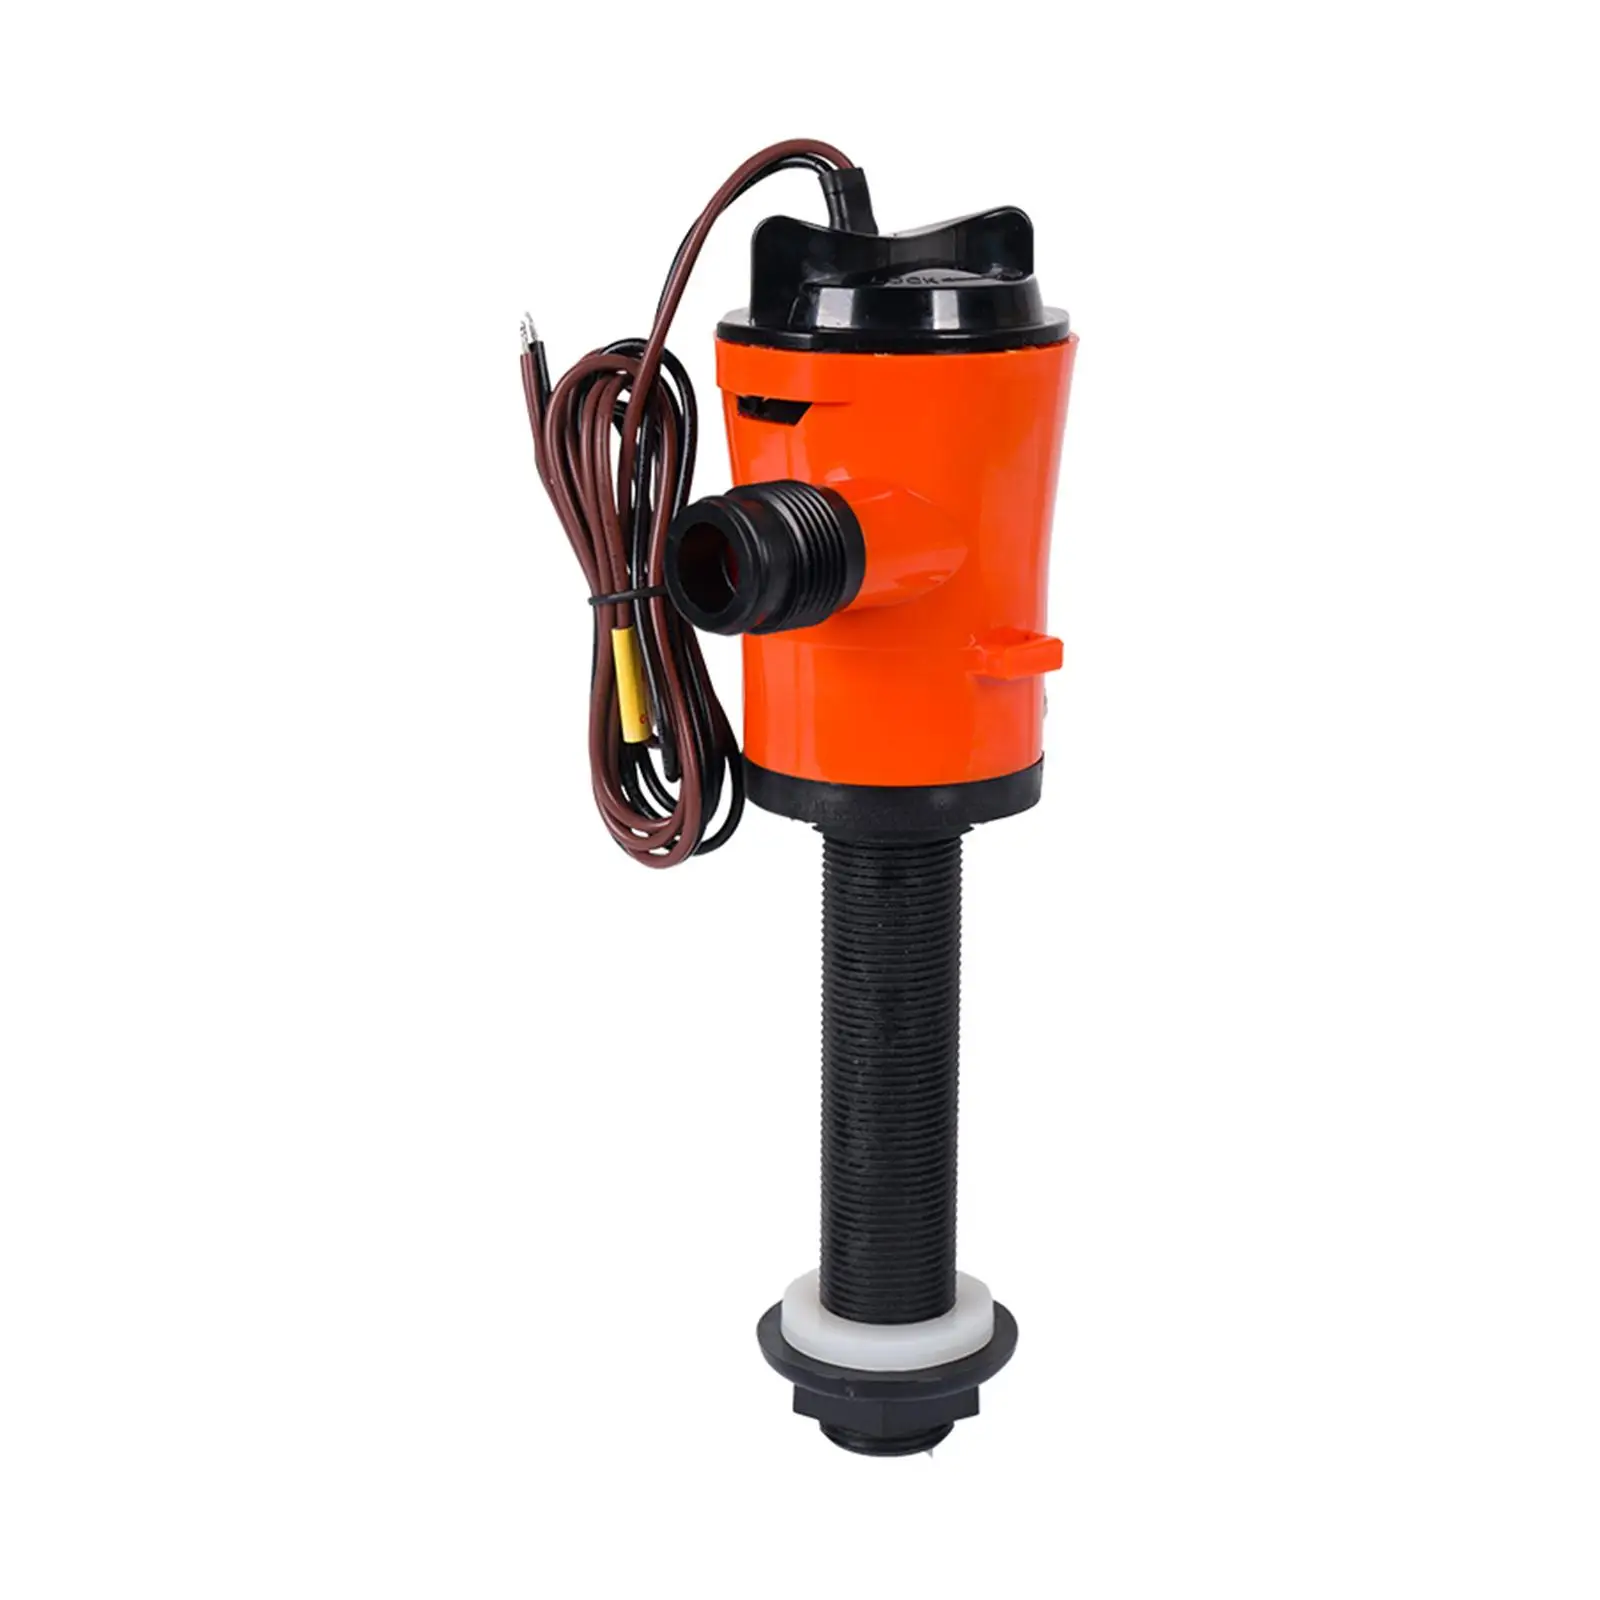 Livewell Pump Replaces Boat Tools Durable Accessories Spare Parts 24V 800GPH